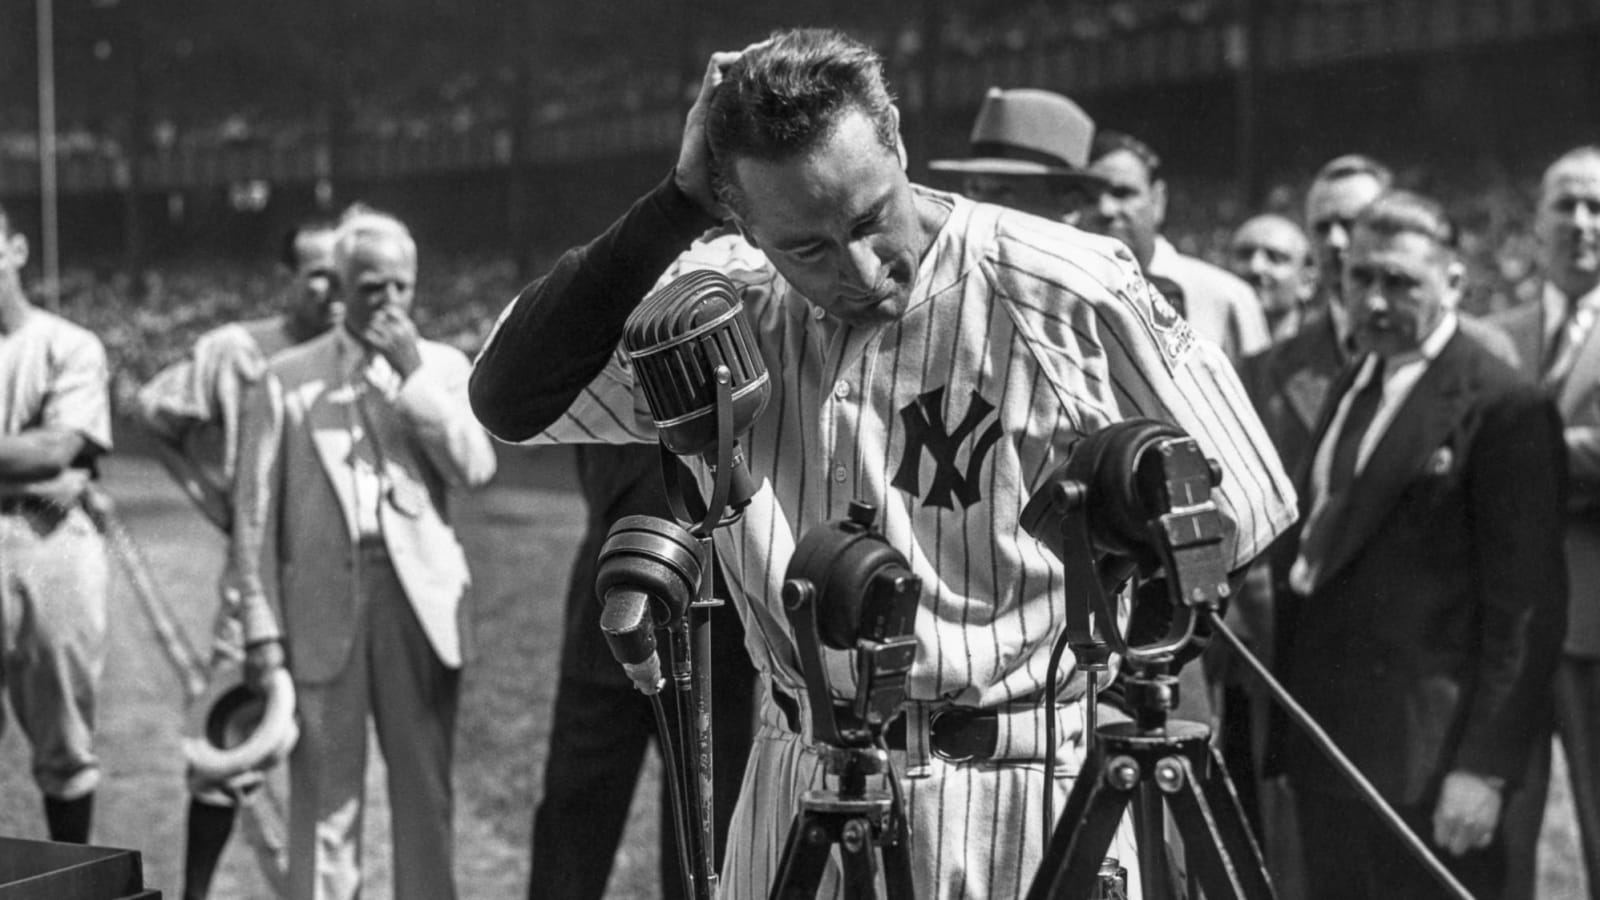 National Baseball Hall of Fame and Museum - On this day in 1923, a 19-year-old  Lou Gehrig officially became a New York Yankee, as the then-Columbia star  signed his first contract with